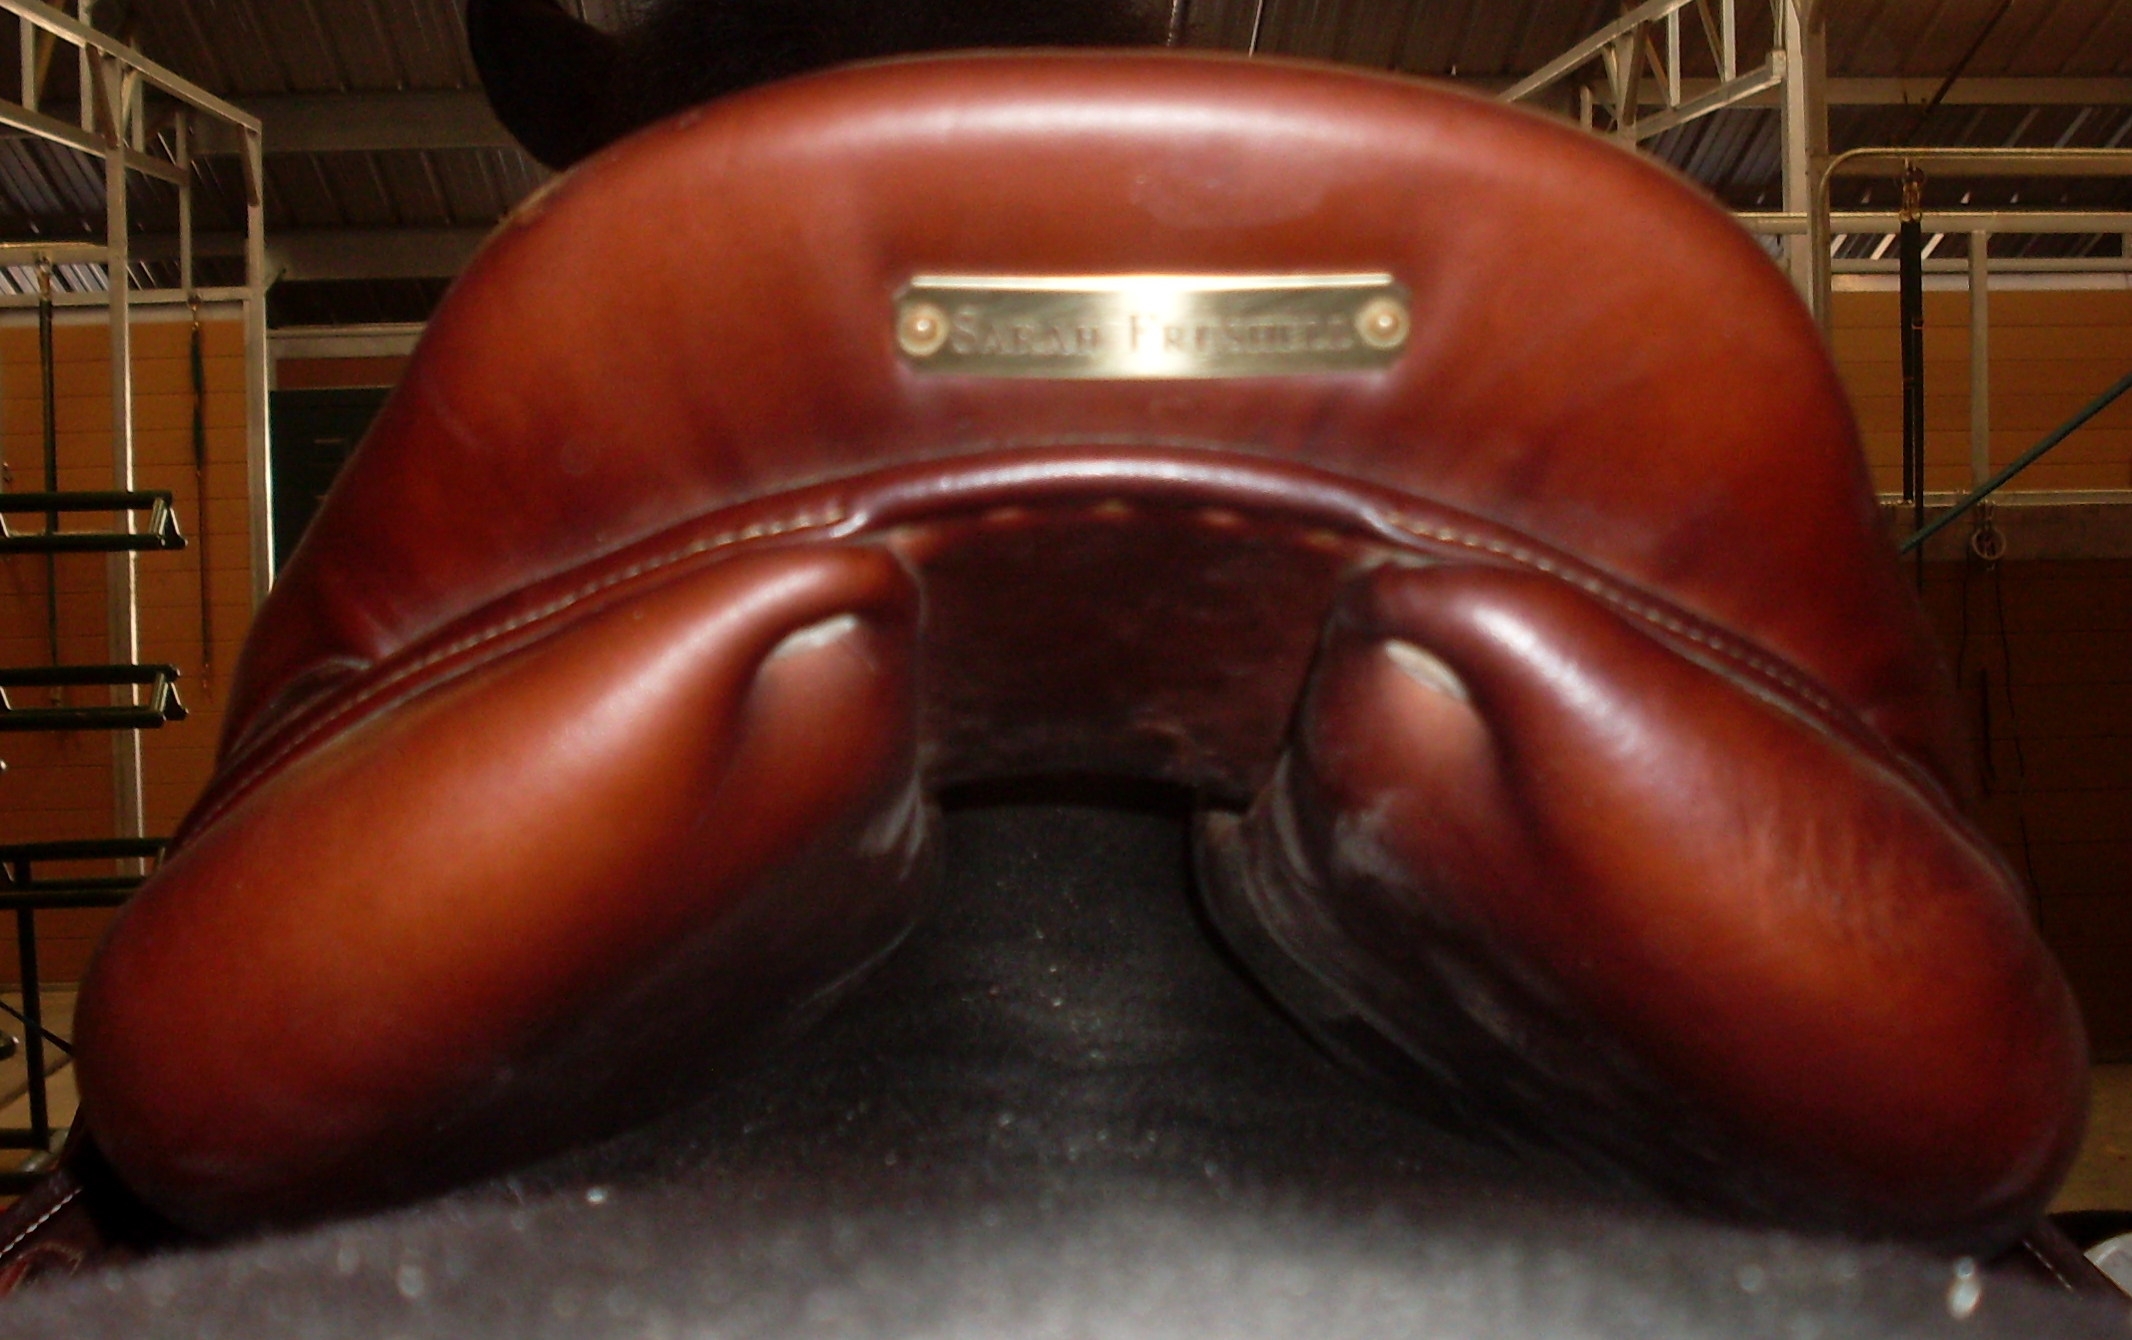 Jumper saddle with foam panels showing very little contact with the horse's back in this case.